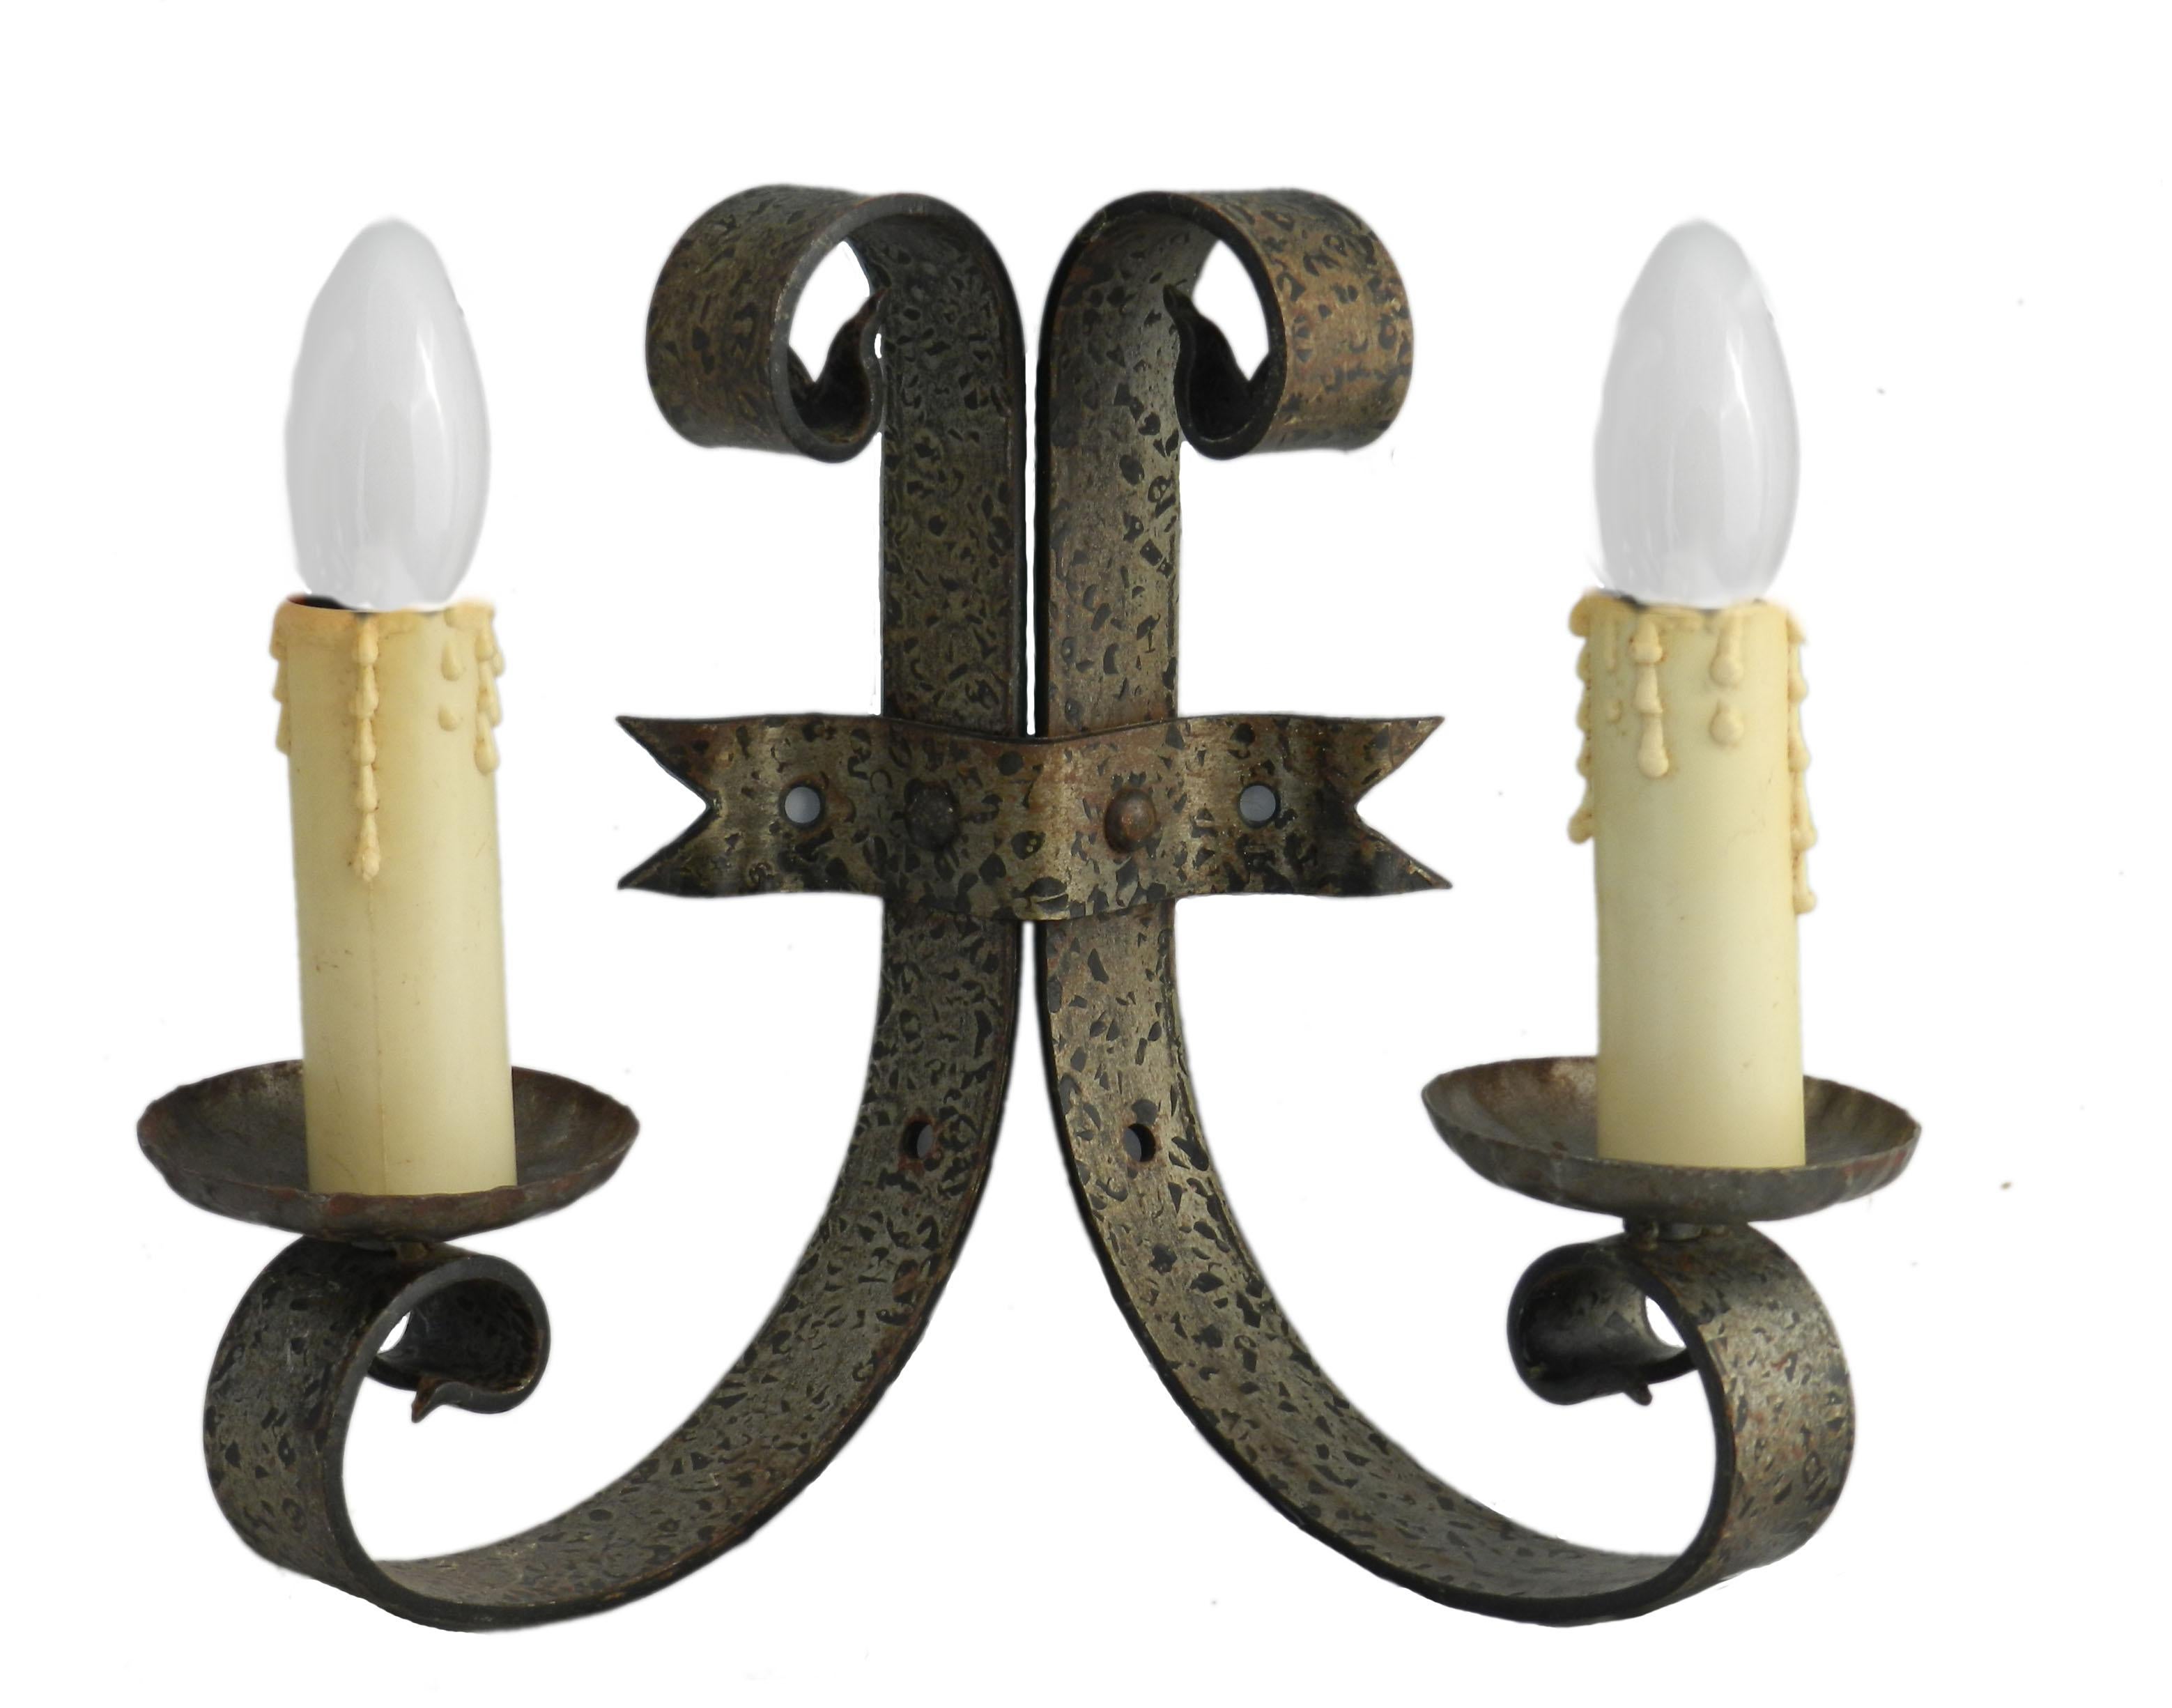 20th Century Pair of Wall Lights Sconces Appliques Gothic Rev Iron Spanish Hollywood Regency